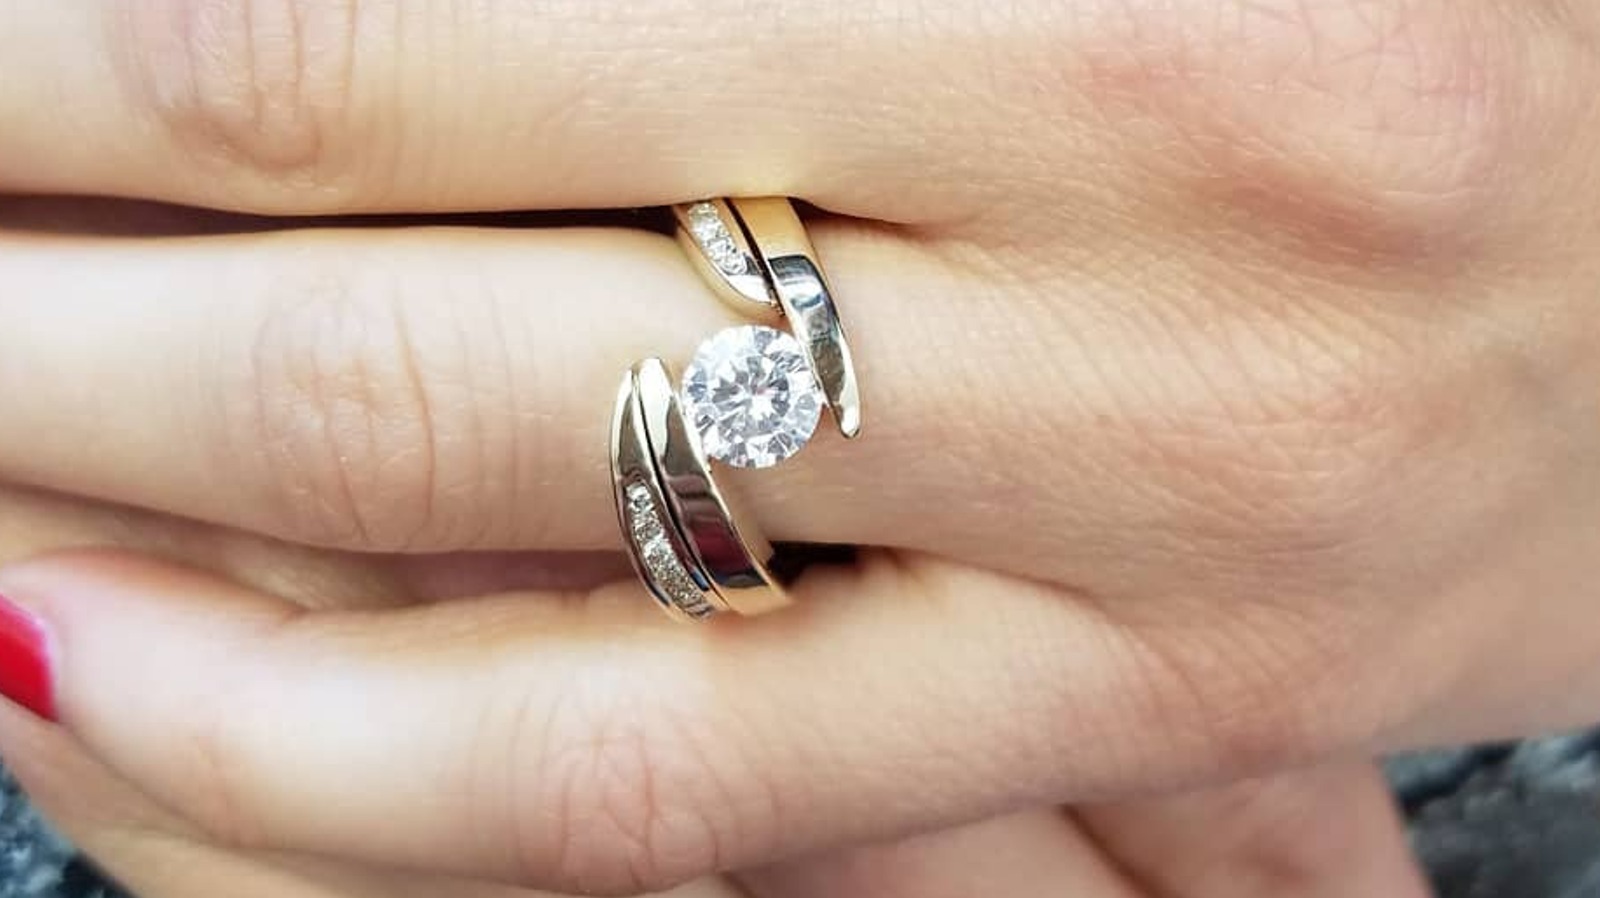 https://www.glam.com/img/gallery/tension-settings-are-the-engagement-ring-trend-you-should-avoid-at-all-costs-heres-why/l-intro-1684899261.jpg